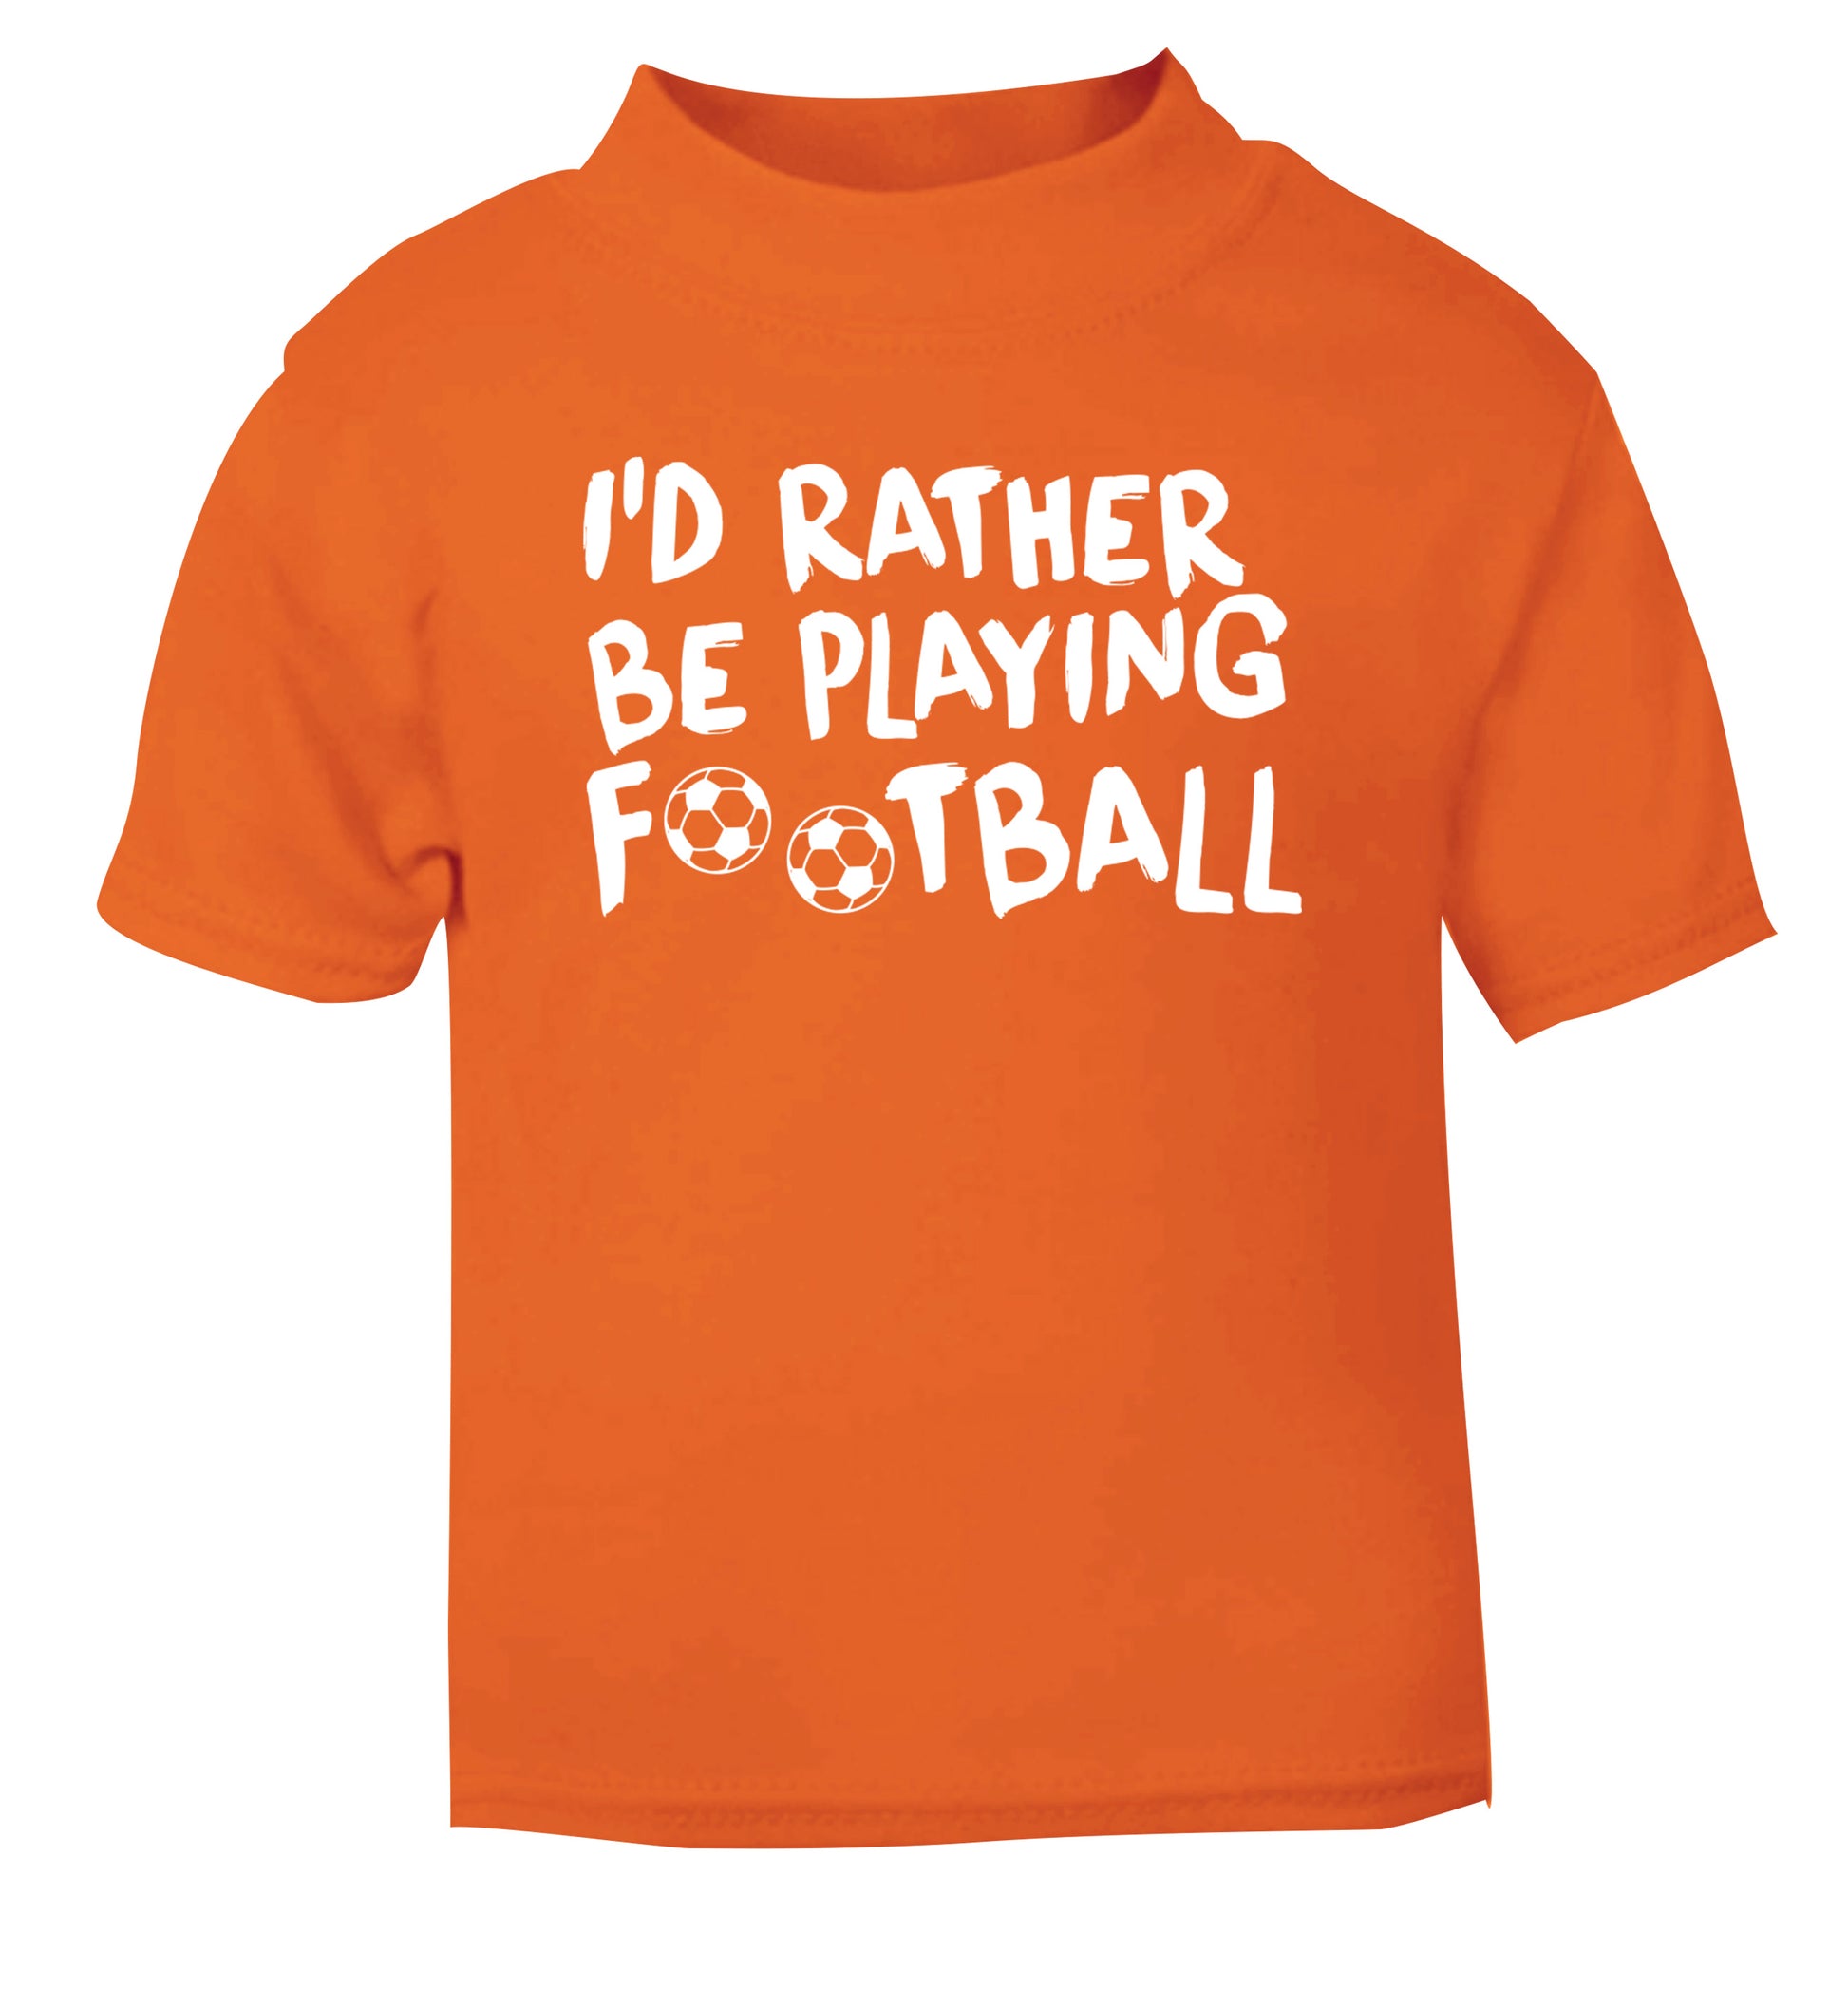 I'd rather be playing football orange Baby Toddler Tshirt 2 Years